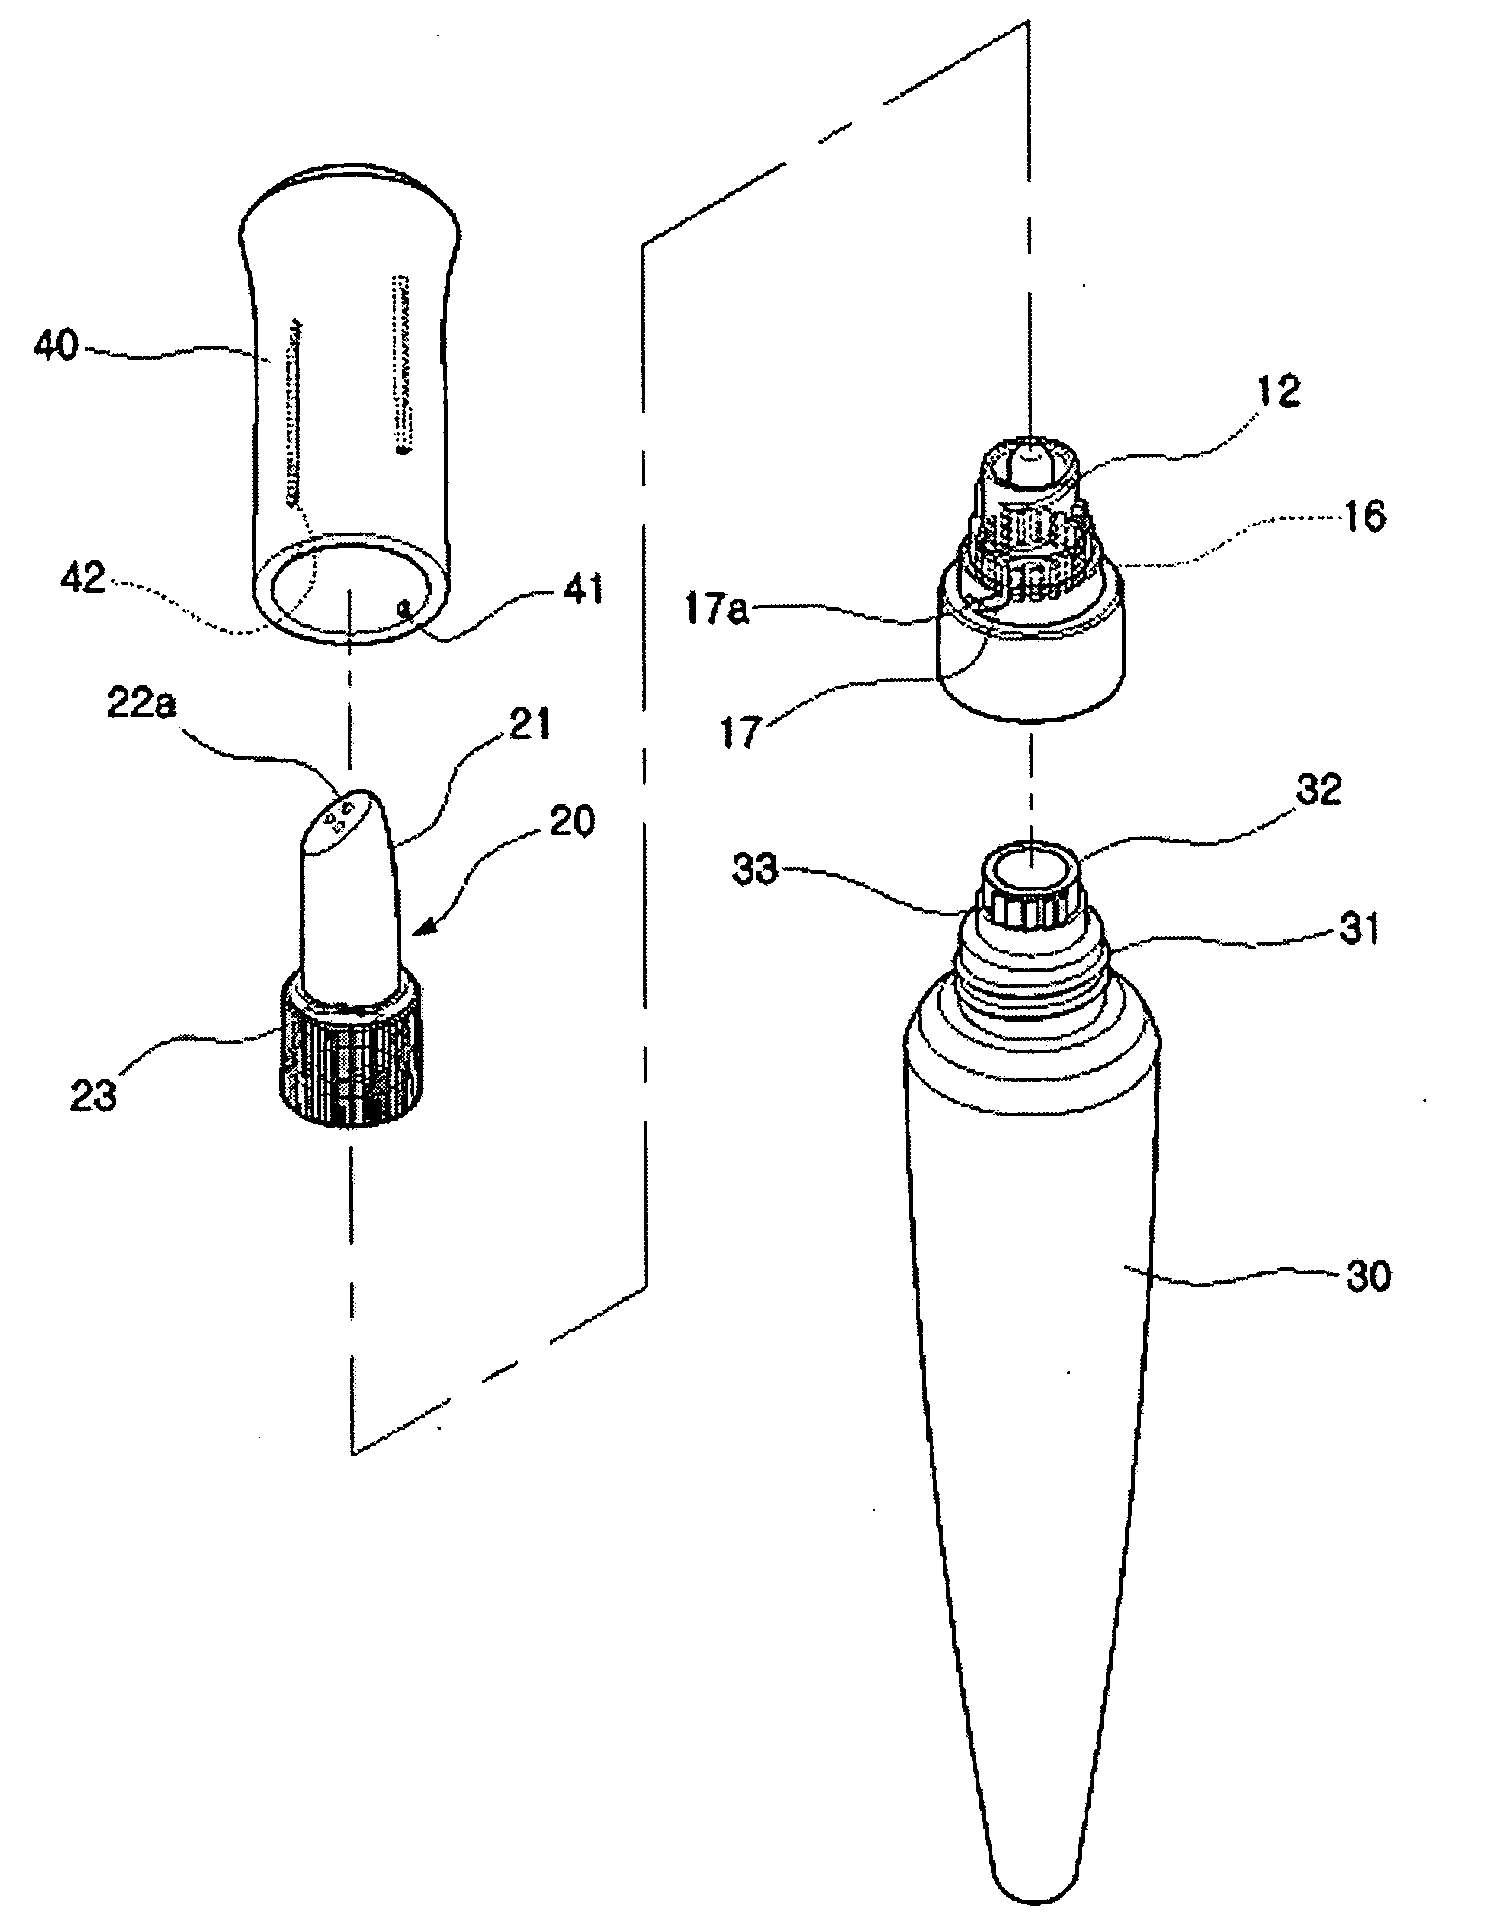 Cosmetic case capable of blocking nozzle tip air tightly